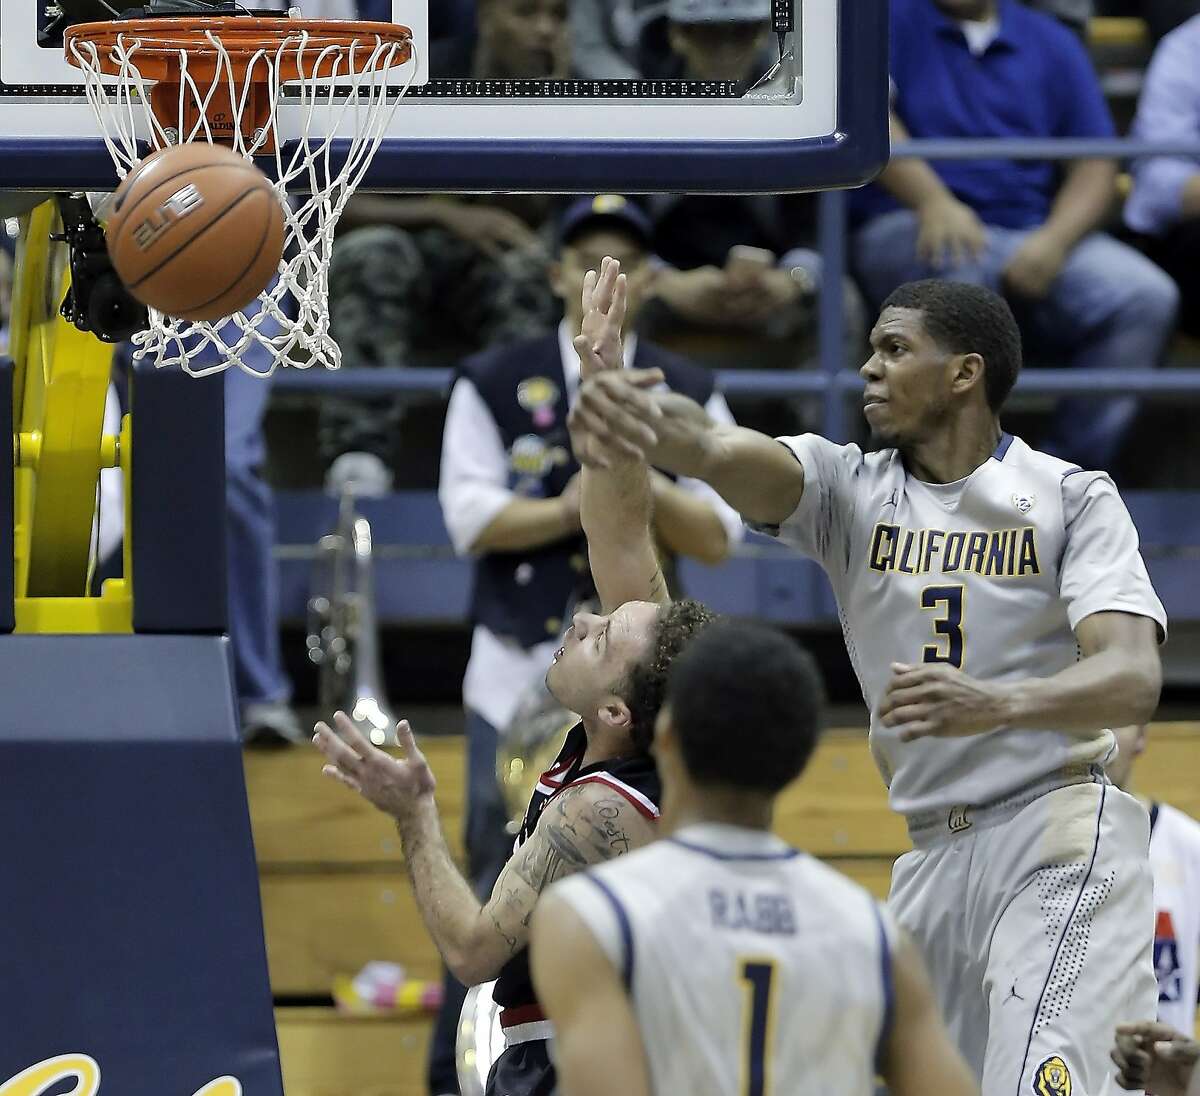 Tyrone Wallace (3) blocks a shot by Malik Montoya (2) in the second half as the Cal Bears played the Seattle University Redhawks at Haas Pavilion in Berkeley, Calif., on Tuesday, December 1, 2015. Cal won 66-52.